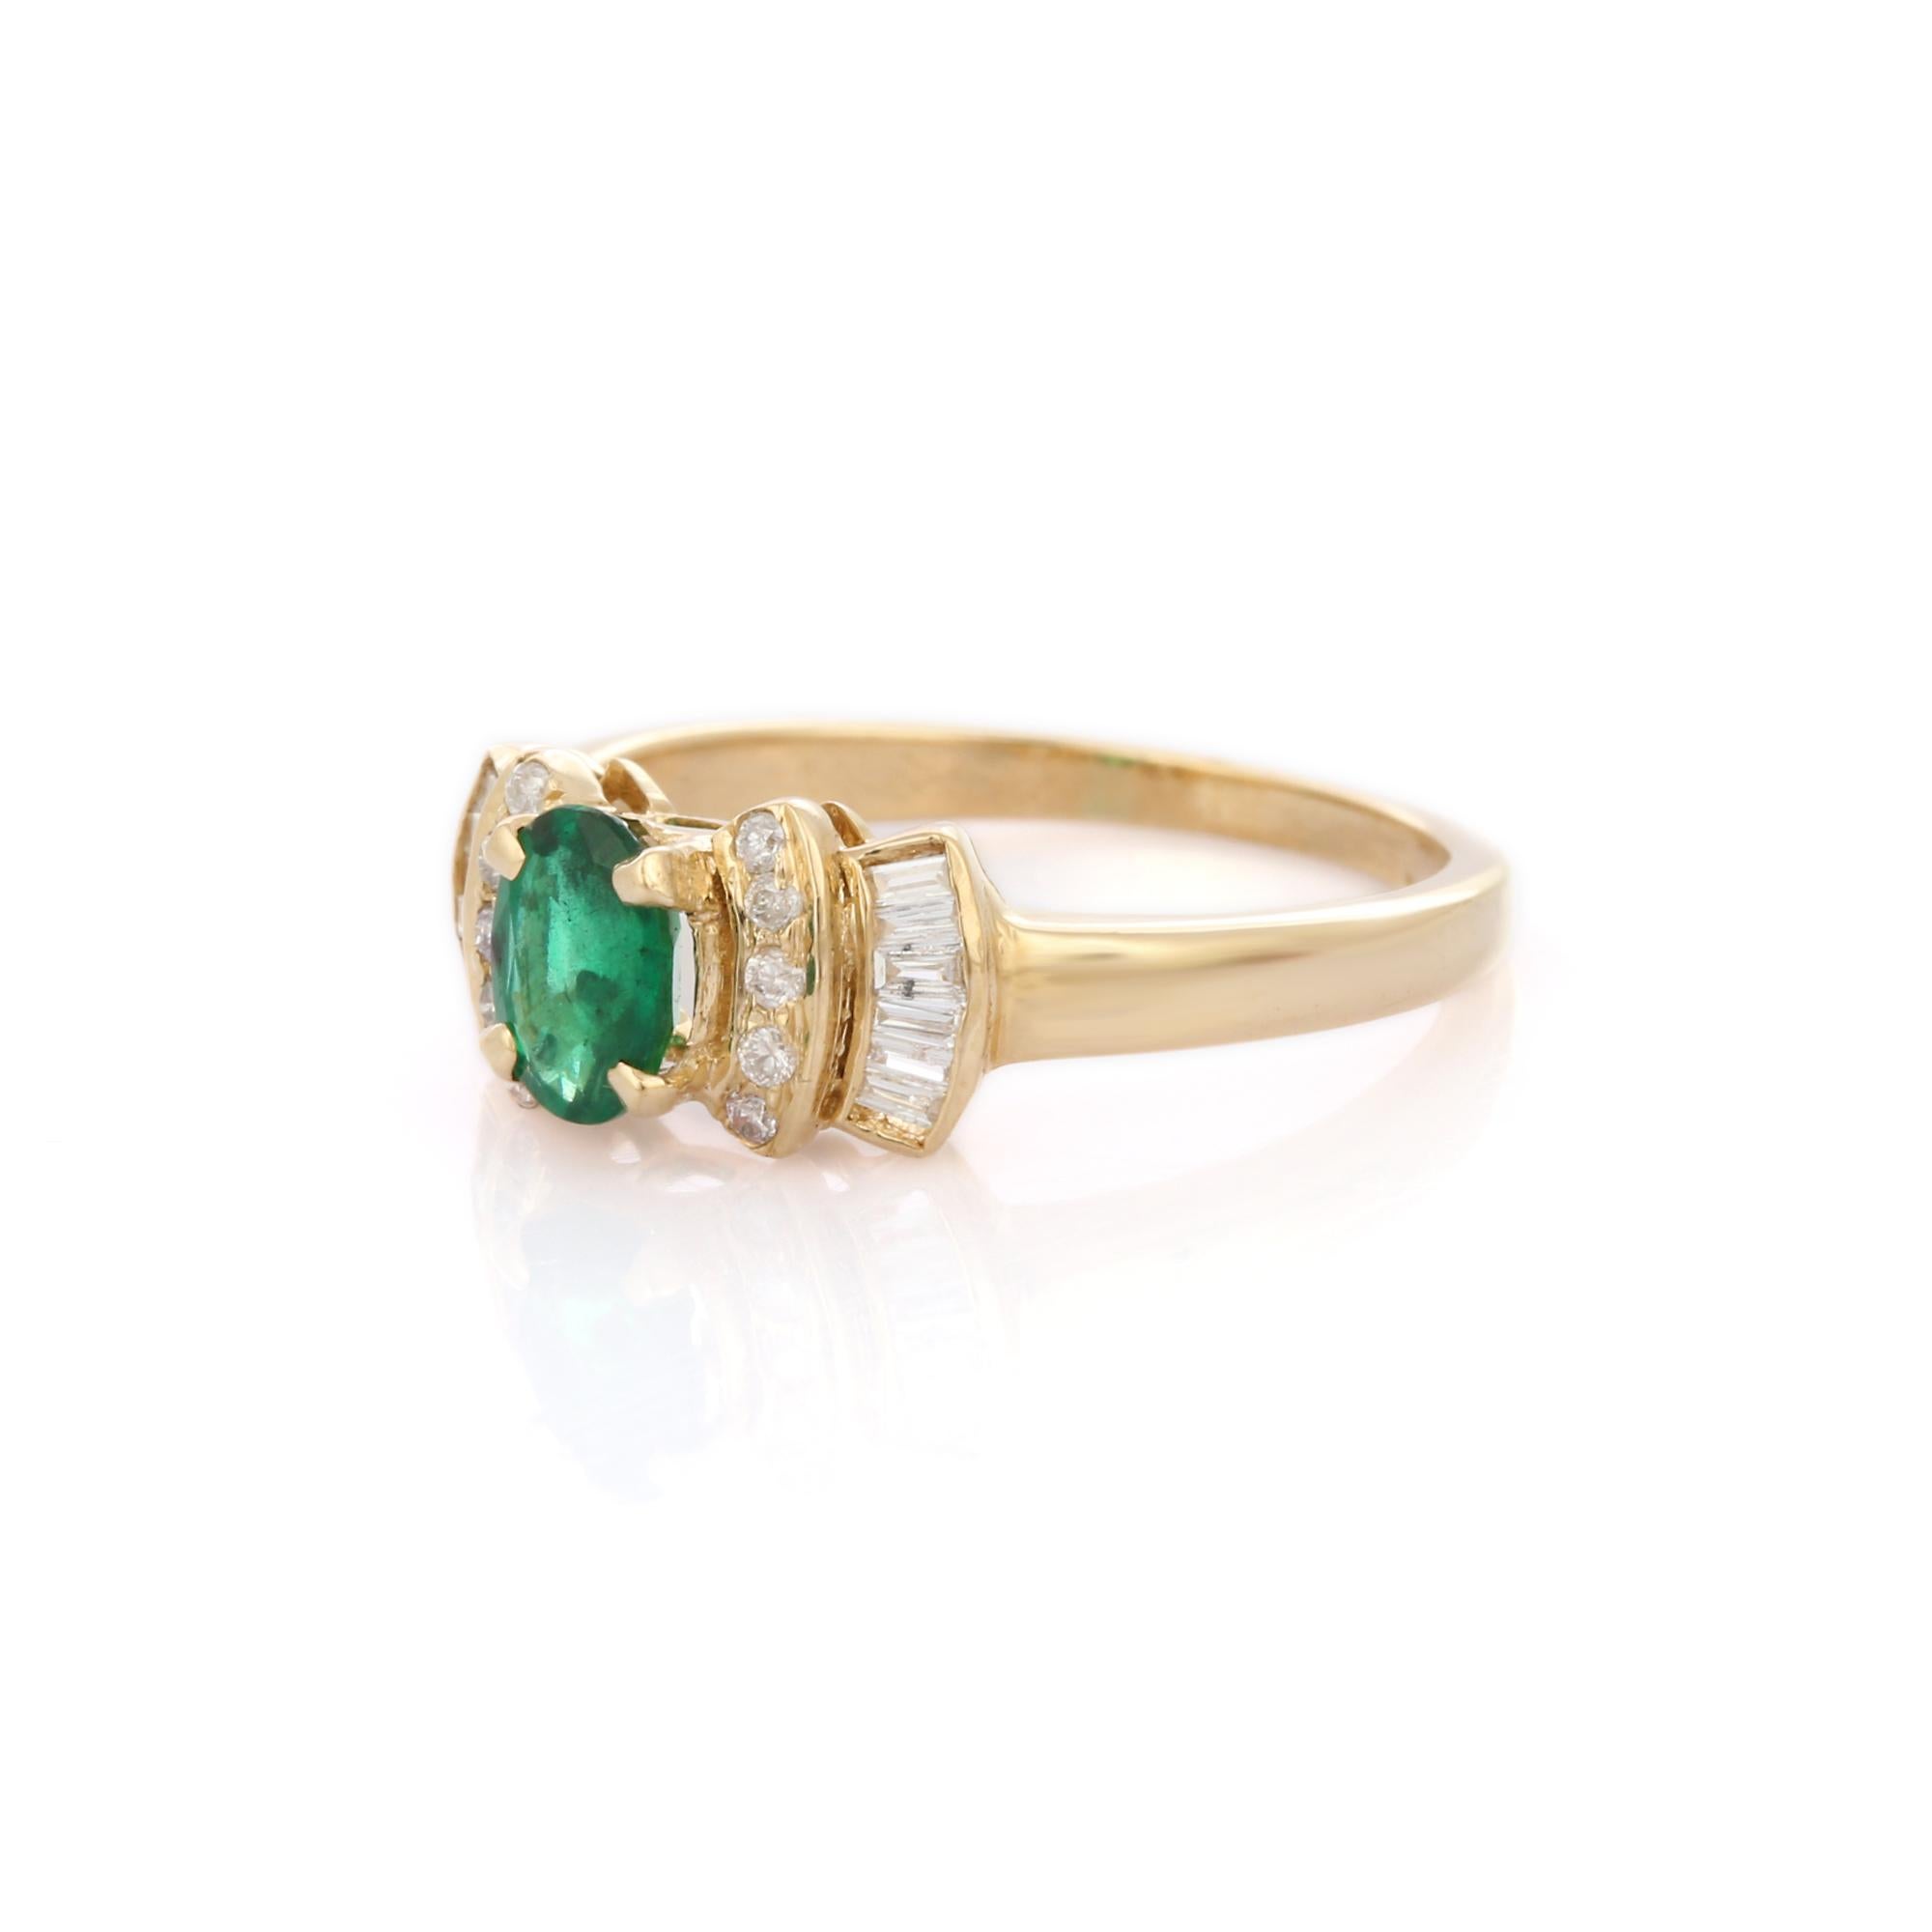 For Sale:  Vivid Green Emerald and Diamond Engagement Ring in 14K Yellow Gold for Her  6